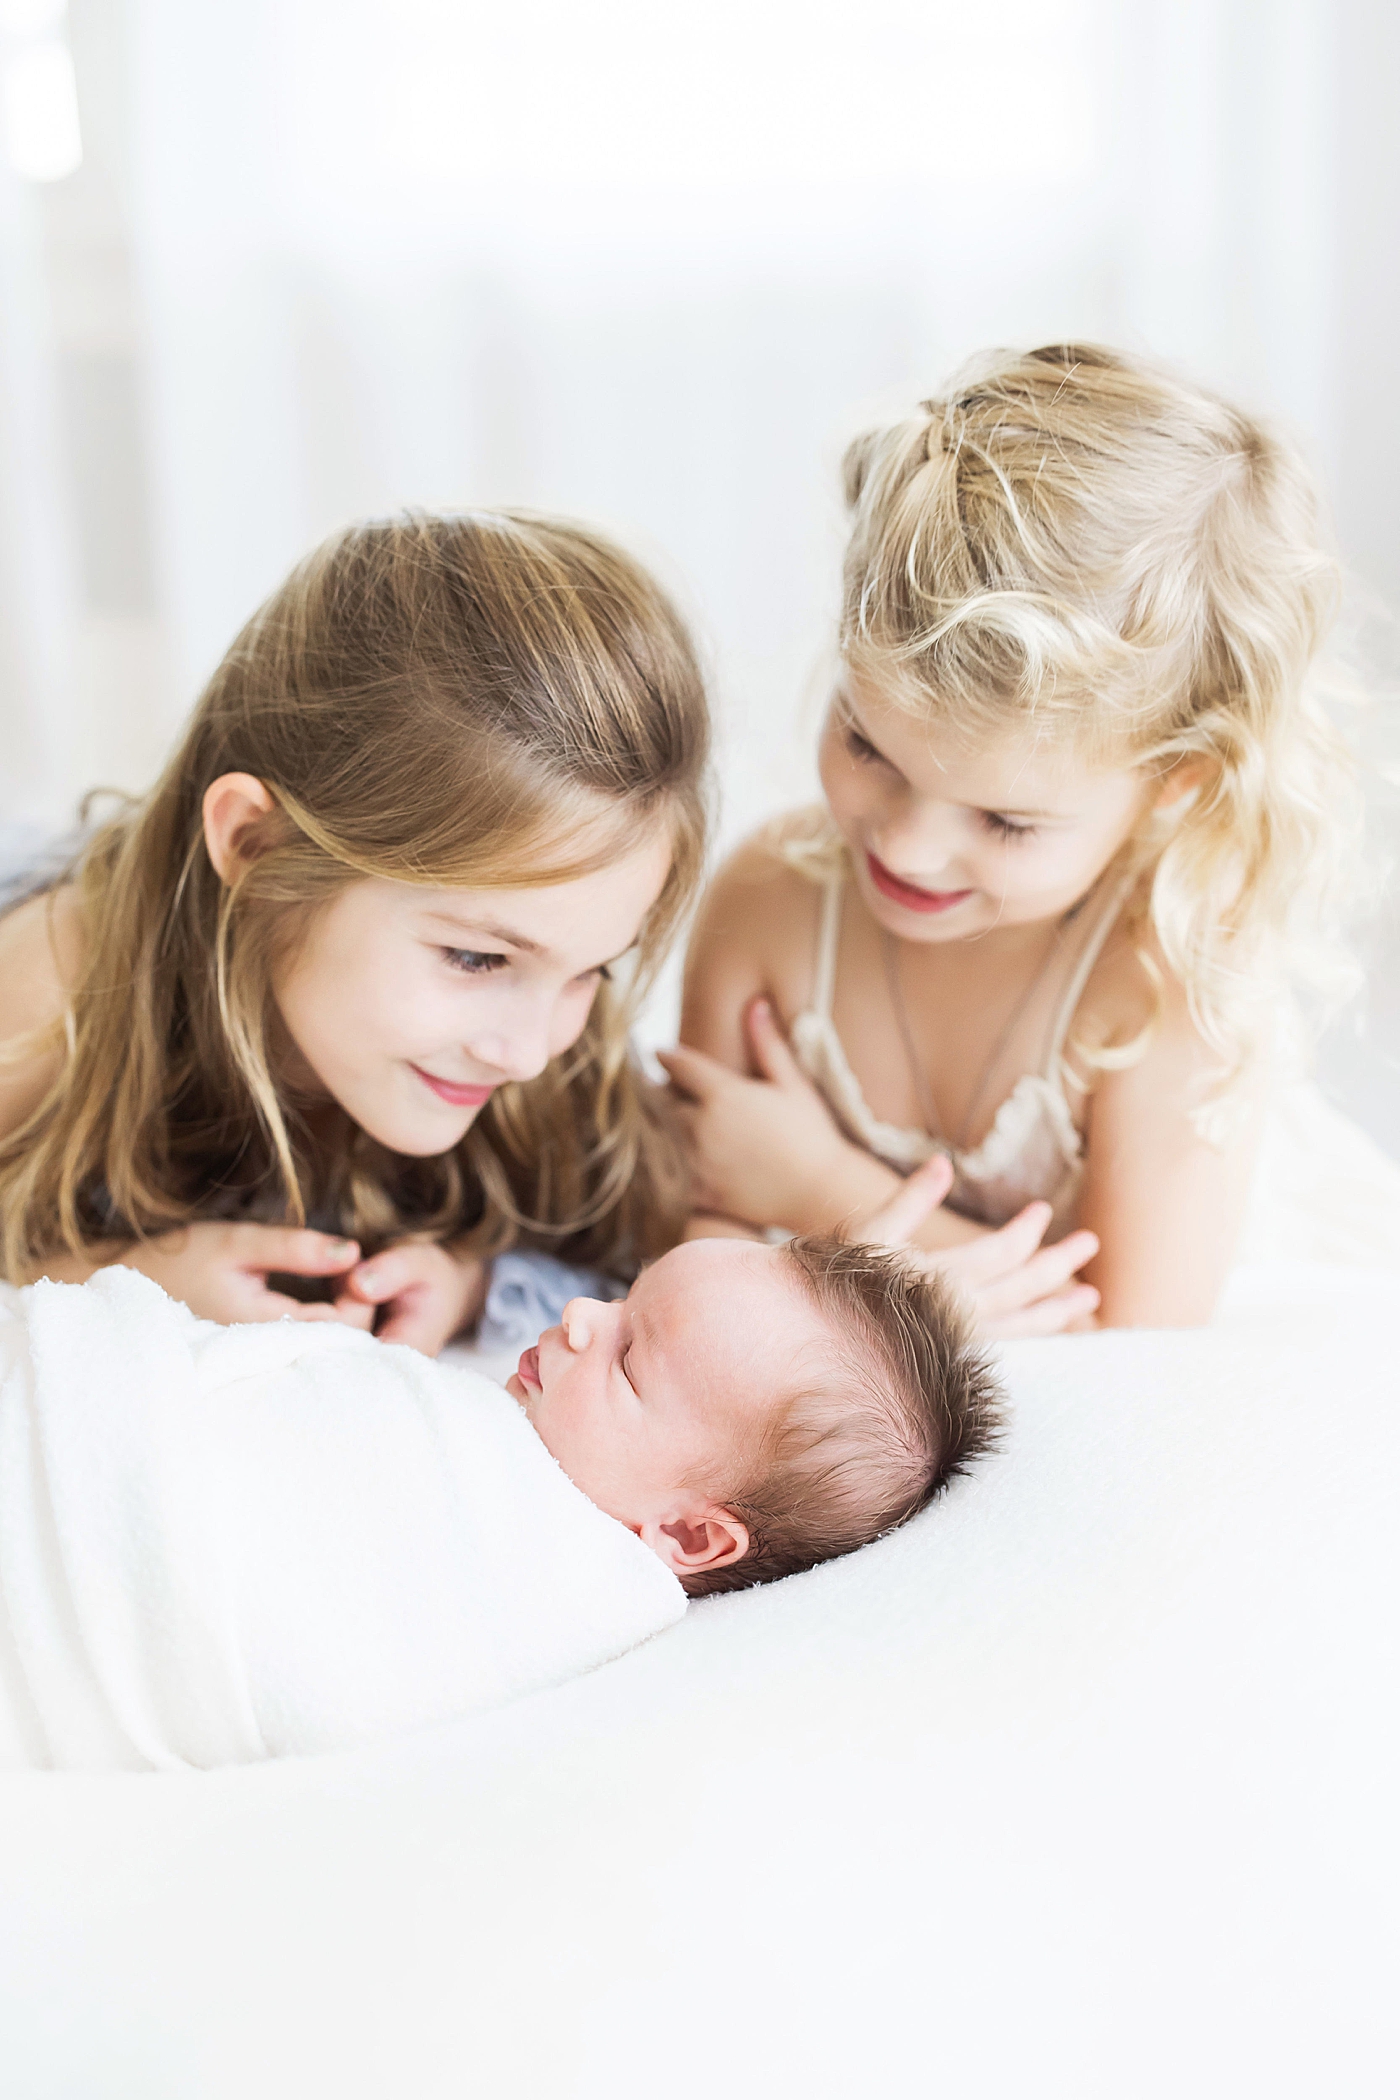 Two big sisters adoring their baby brother. Photo by Fresh Light Photography.